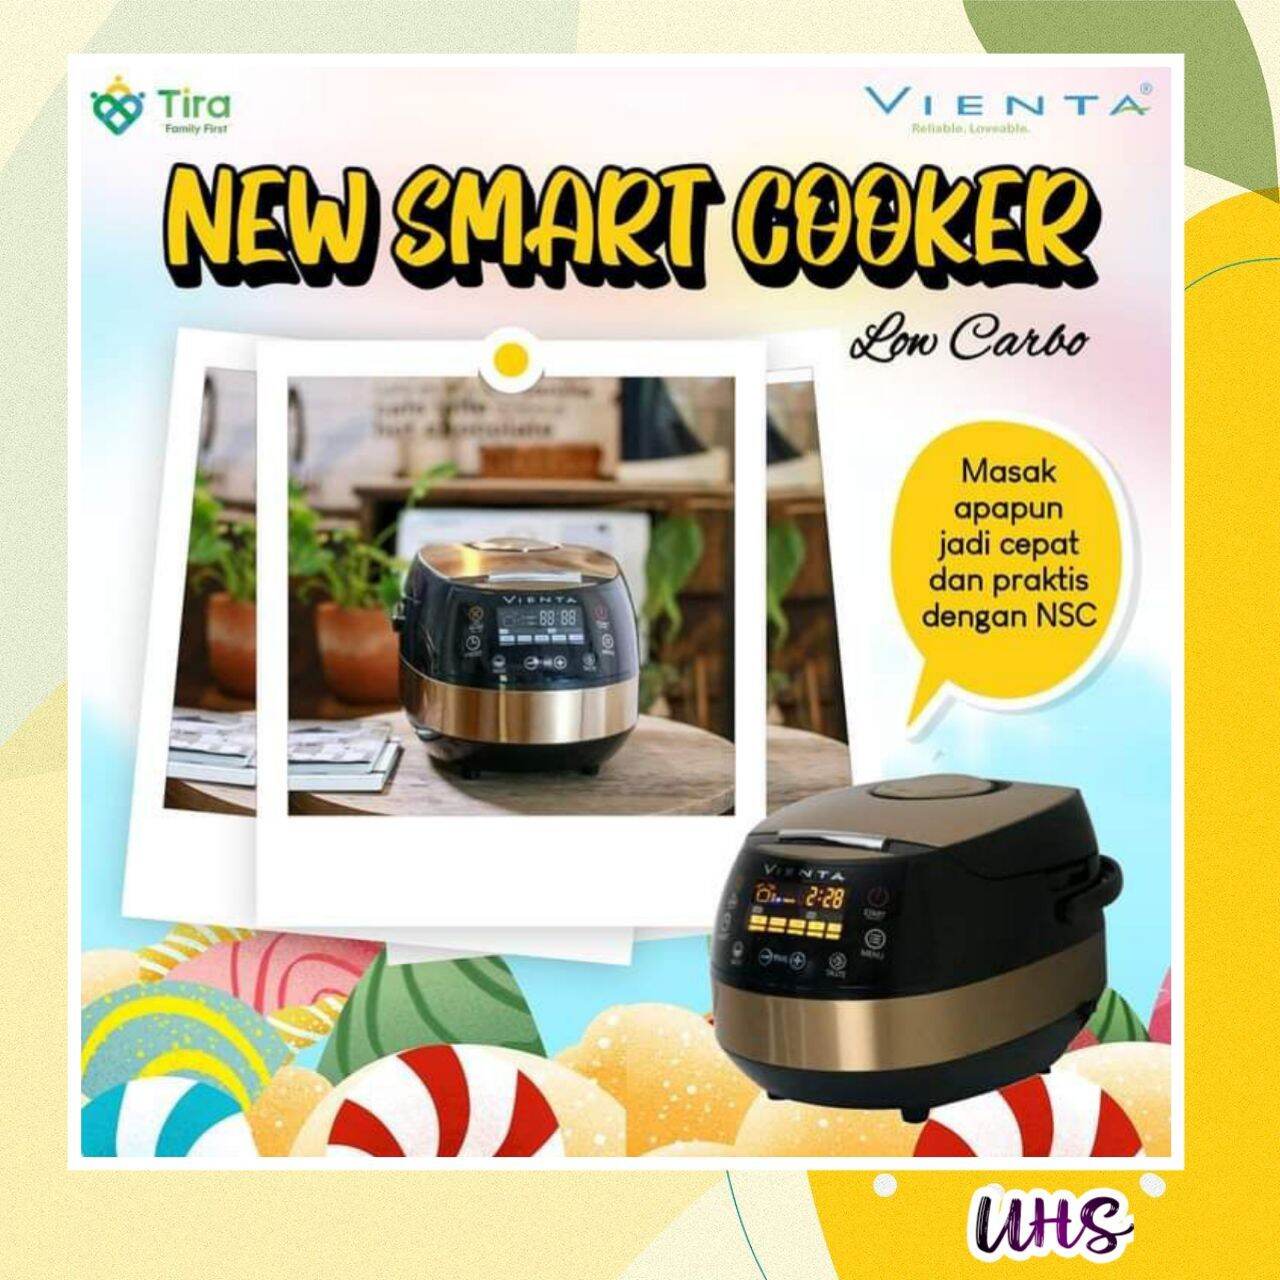 Smart Cooker Low Carbo